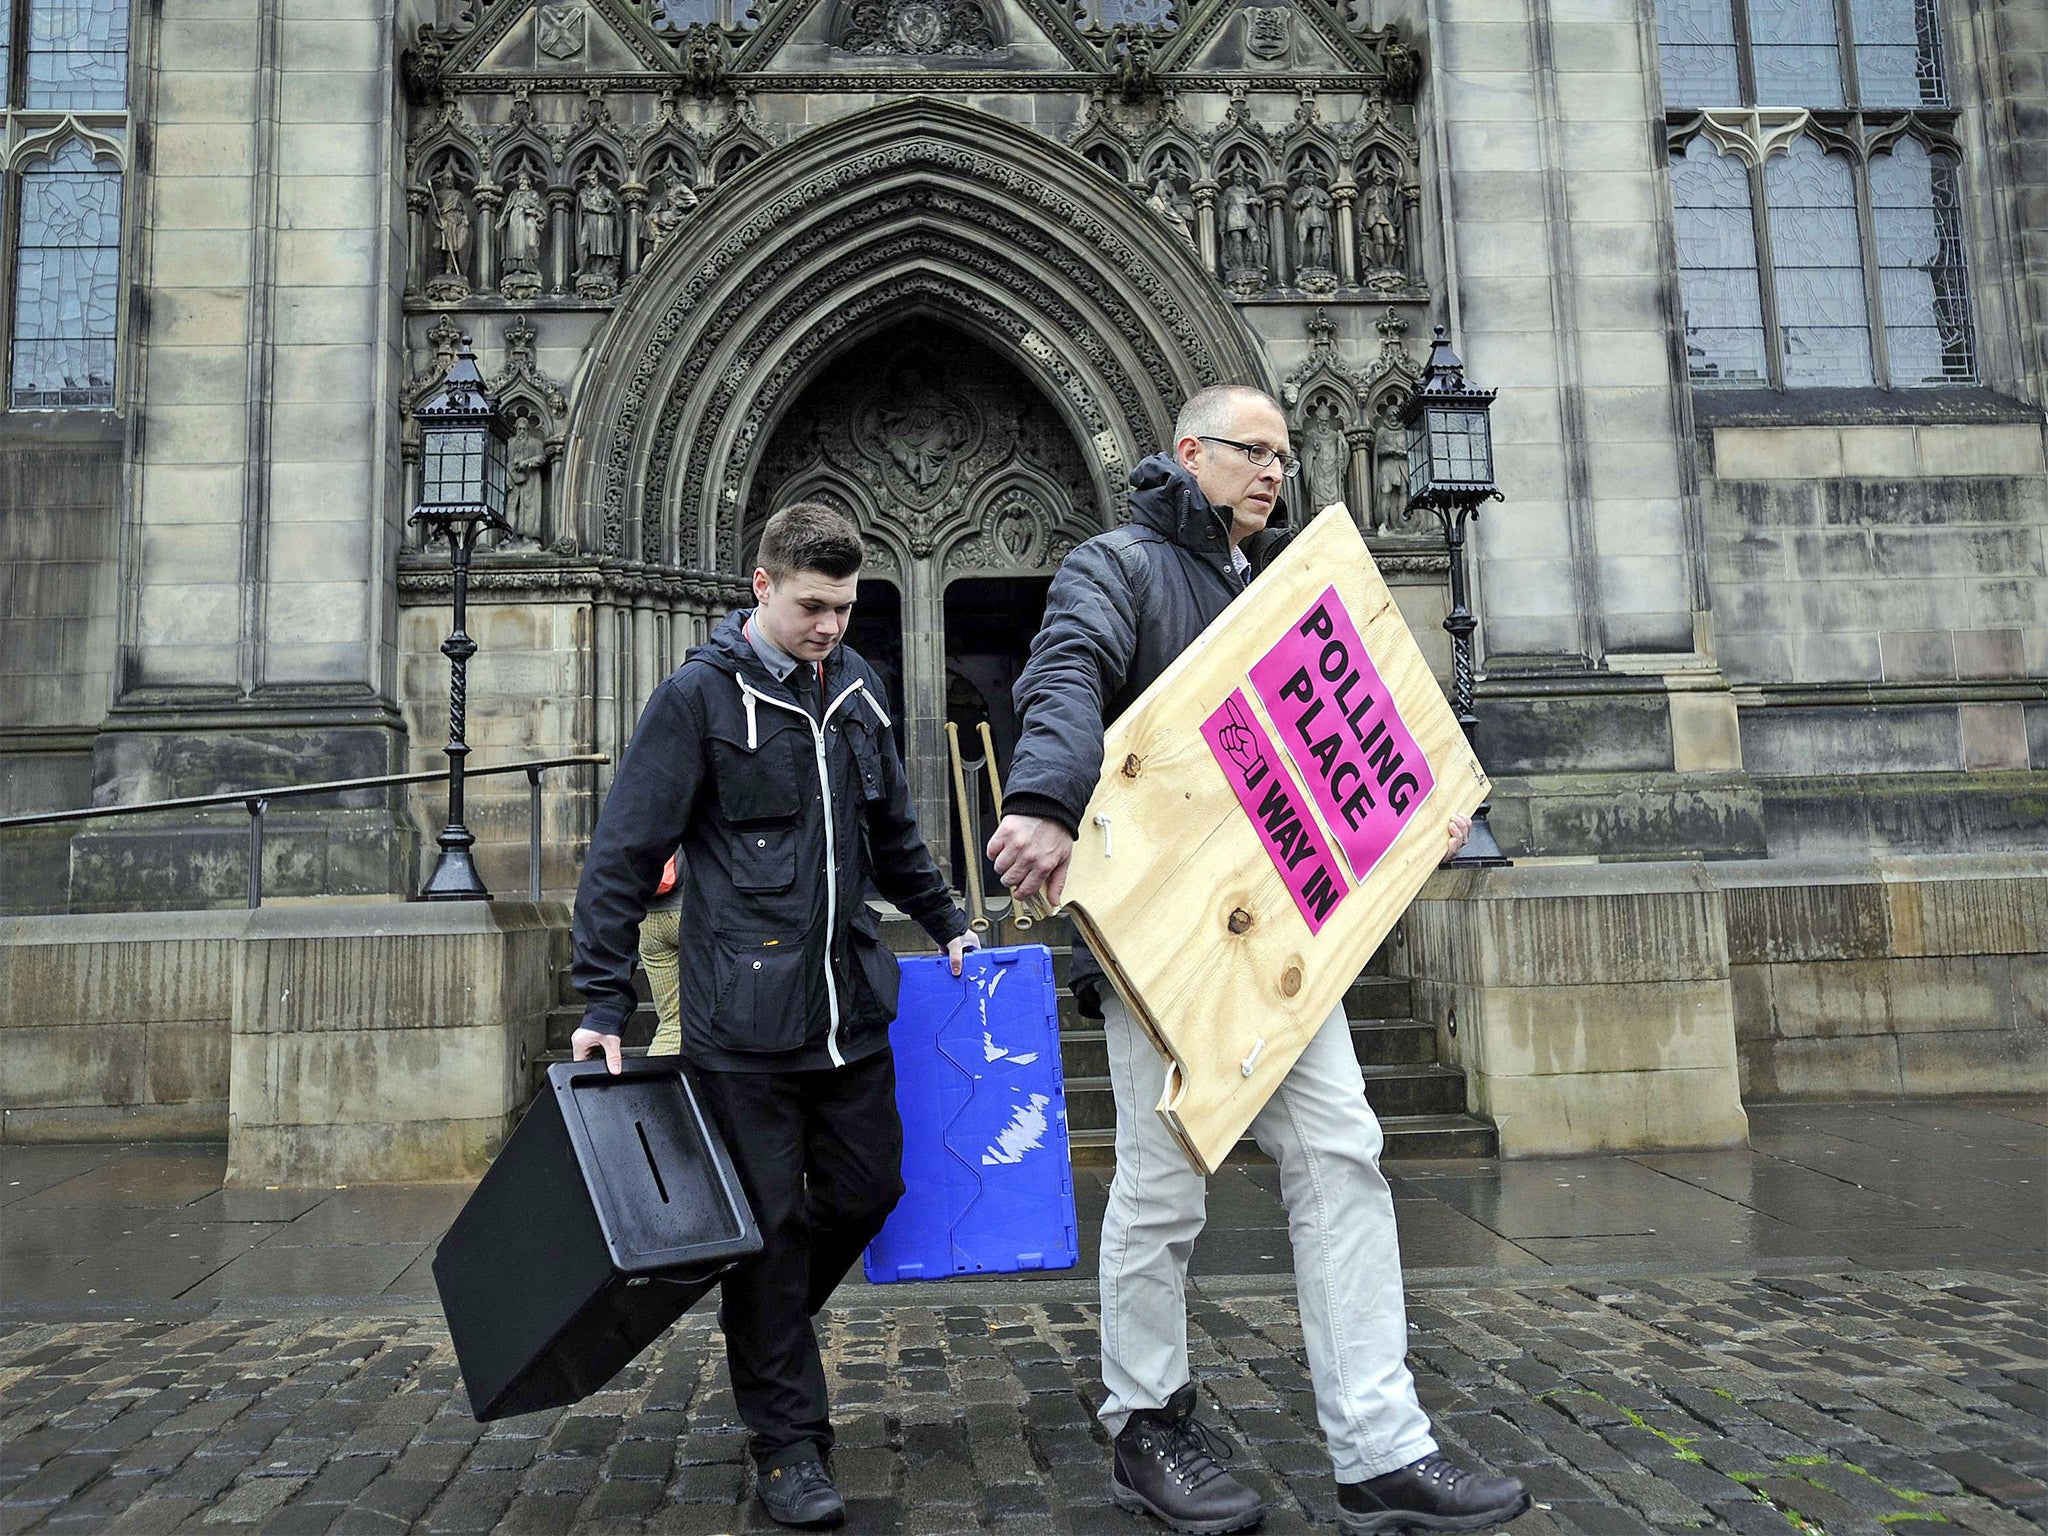 Staff deliver ballot boxes and signs to a polling station on Edinburgh’s Royal Mile on the eve of the election